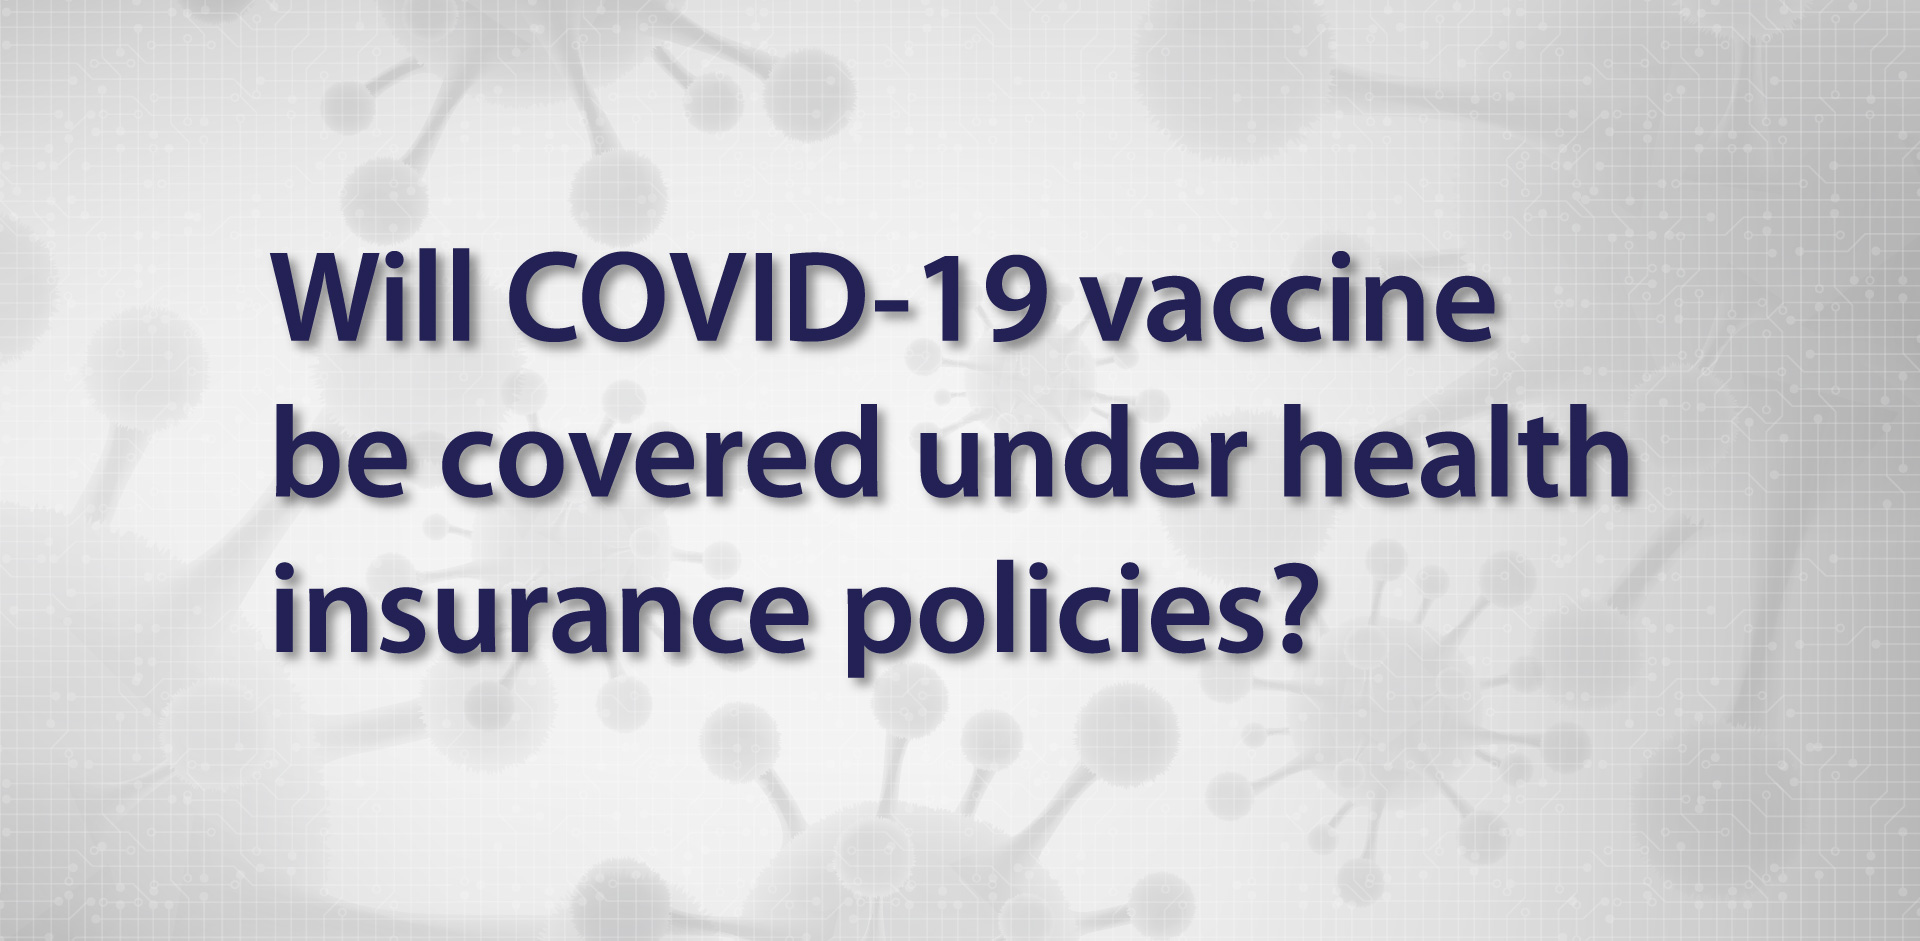 Will COVID-19 vaccine be covered under health insurance policies?